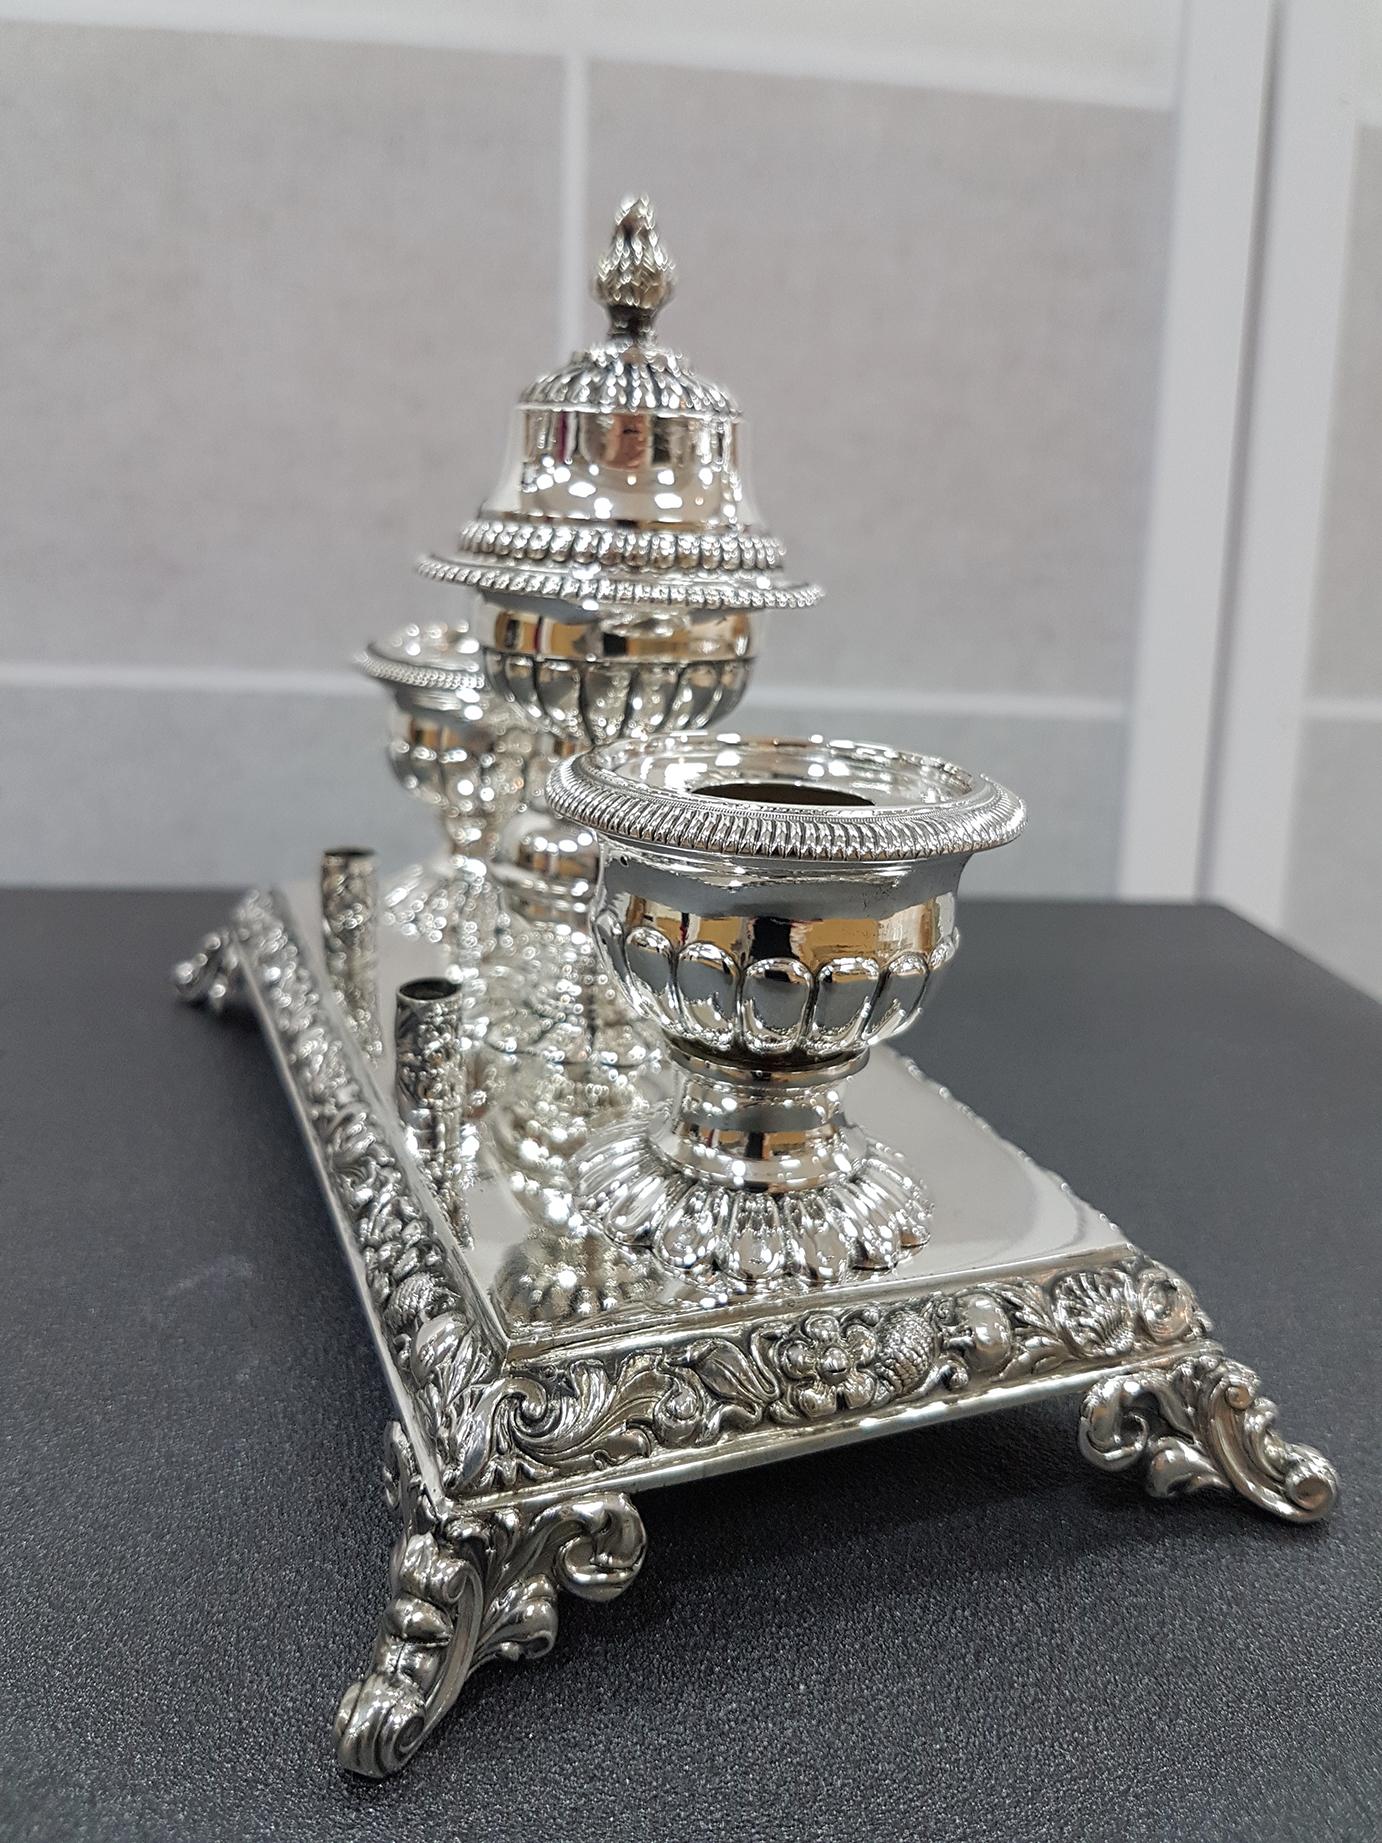 Silver 800 rectangular inkwell on feet in Baroque style characterized by embossed and chiselled shells and swirls.
At the centre of the inkwell a bell is positioned while on the sides there is the talc powder holder and candleholder.
330